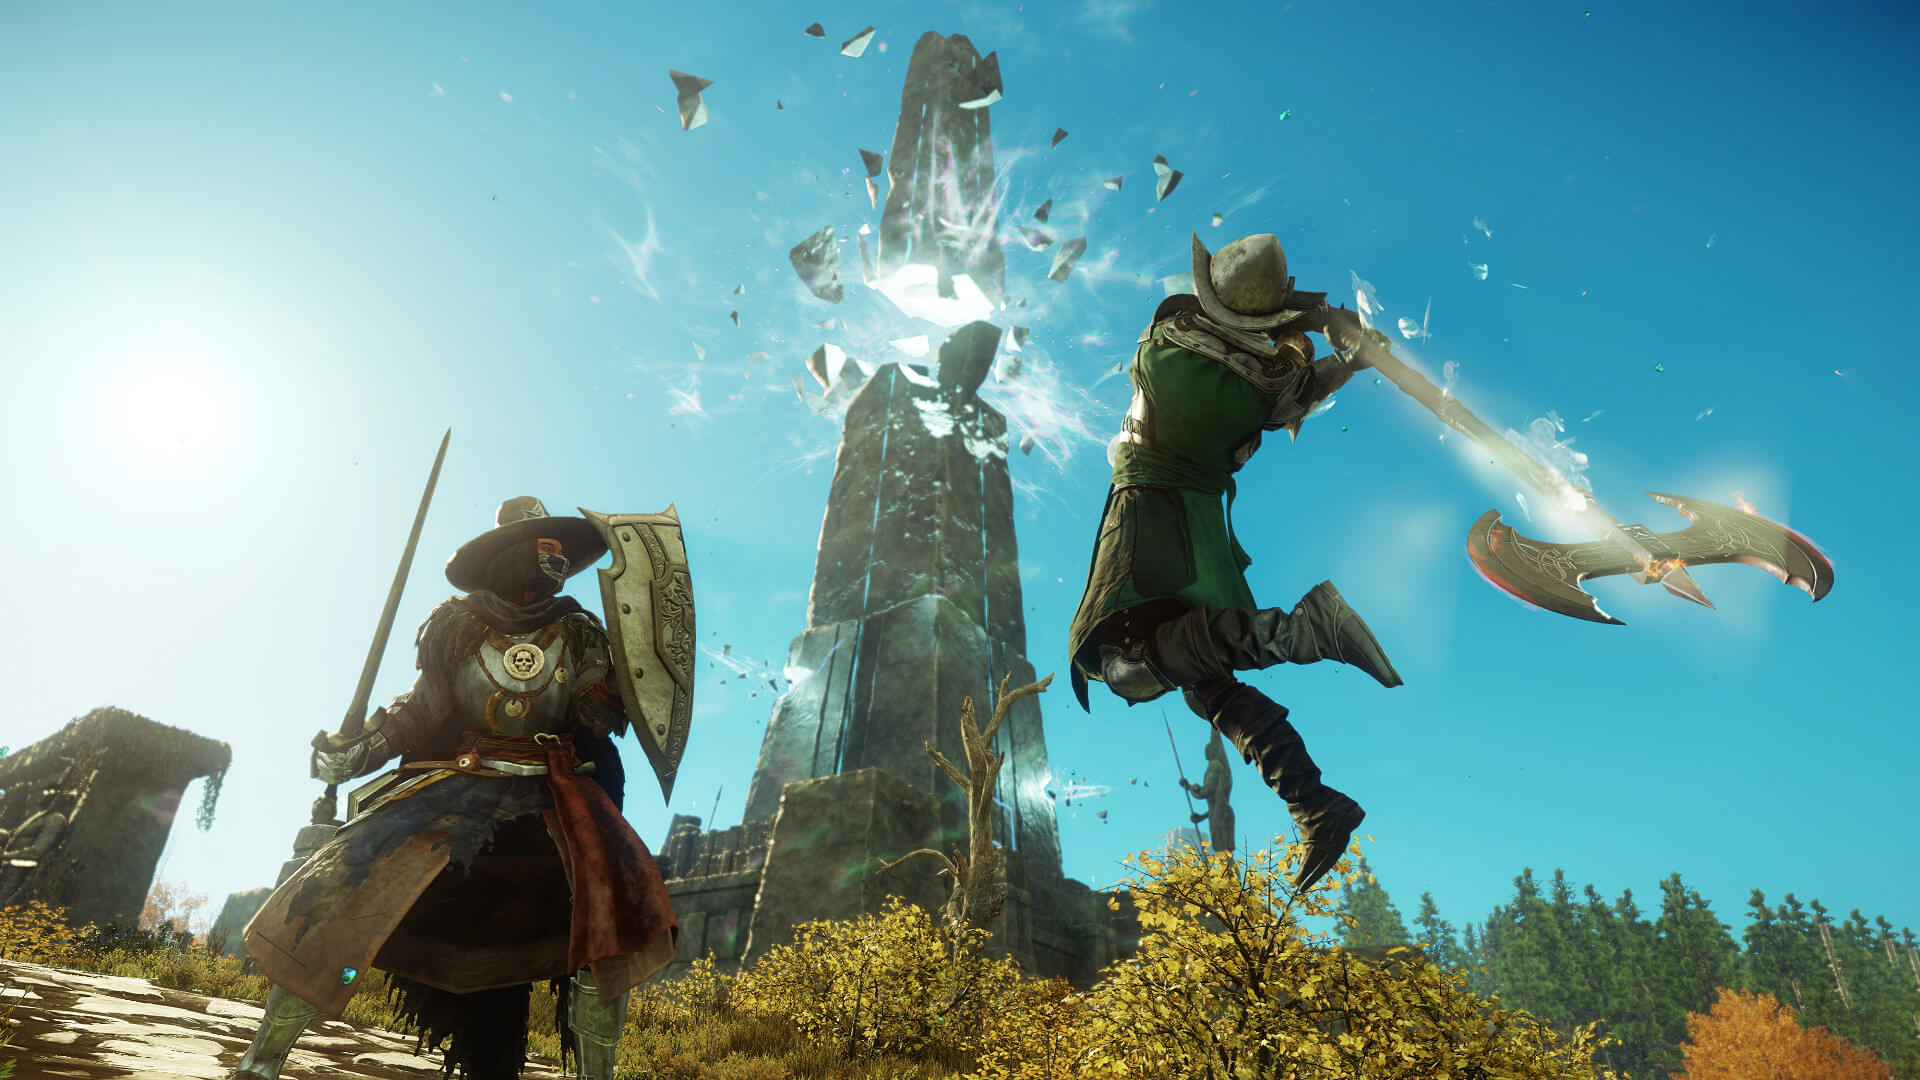 A player leaping into the air with a double-bladed axe in New World